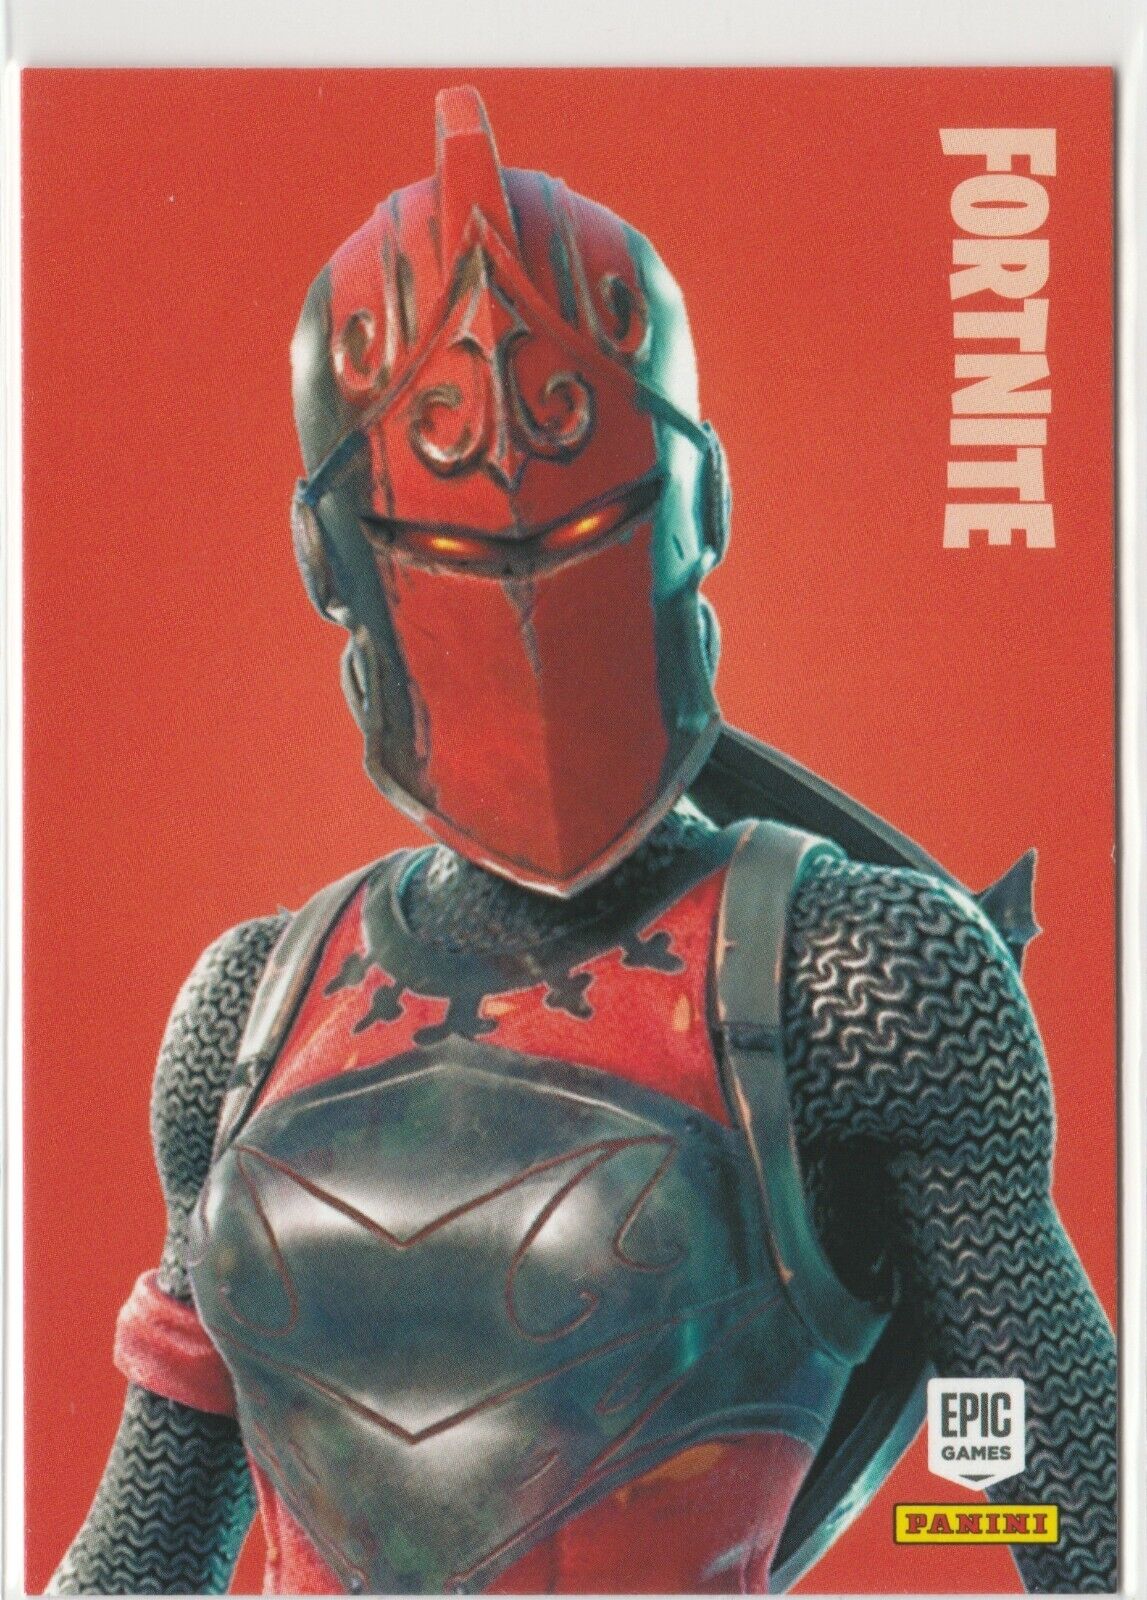 2019 Panini Fortnite Series 1 USA Print Legendary Outfit #285 Red Knight